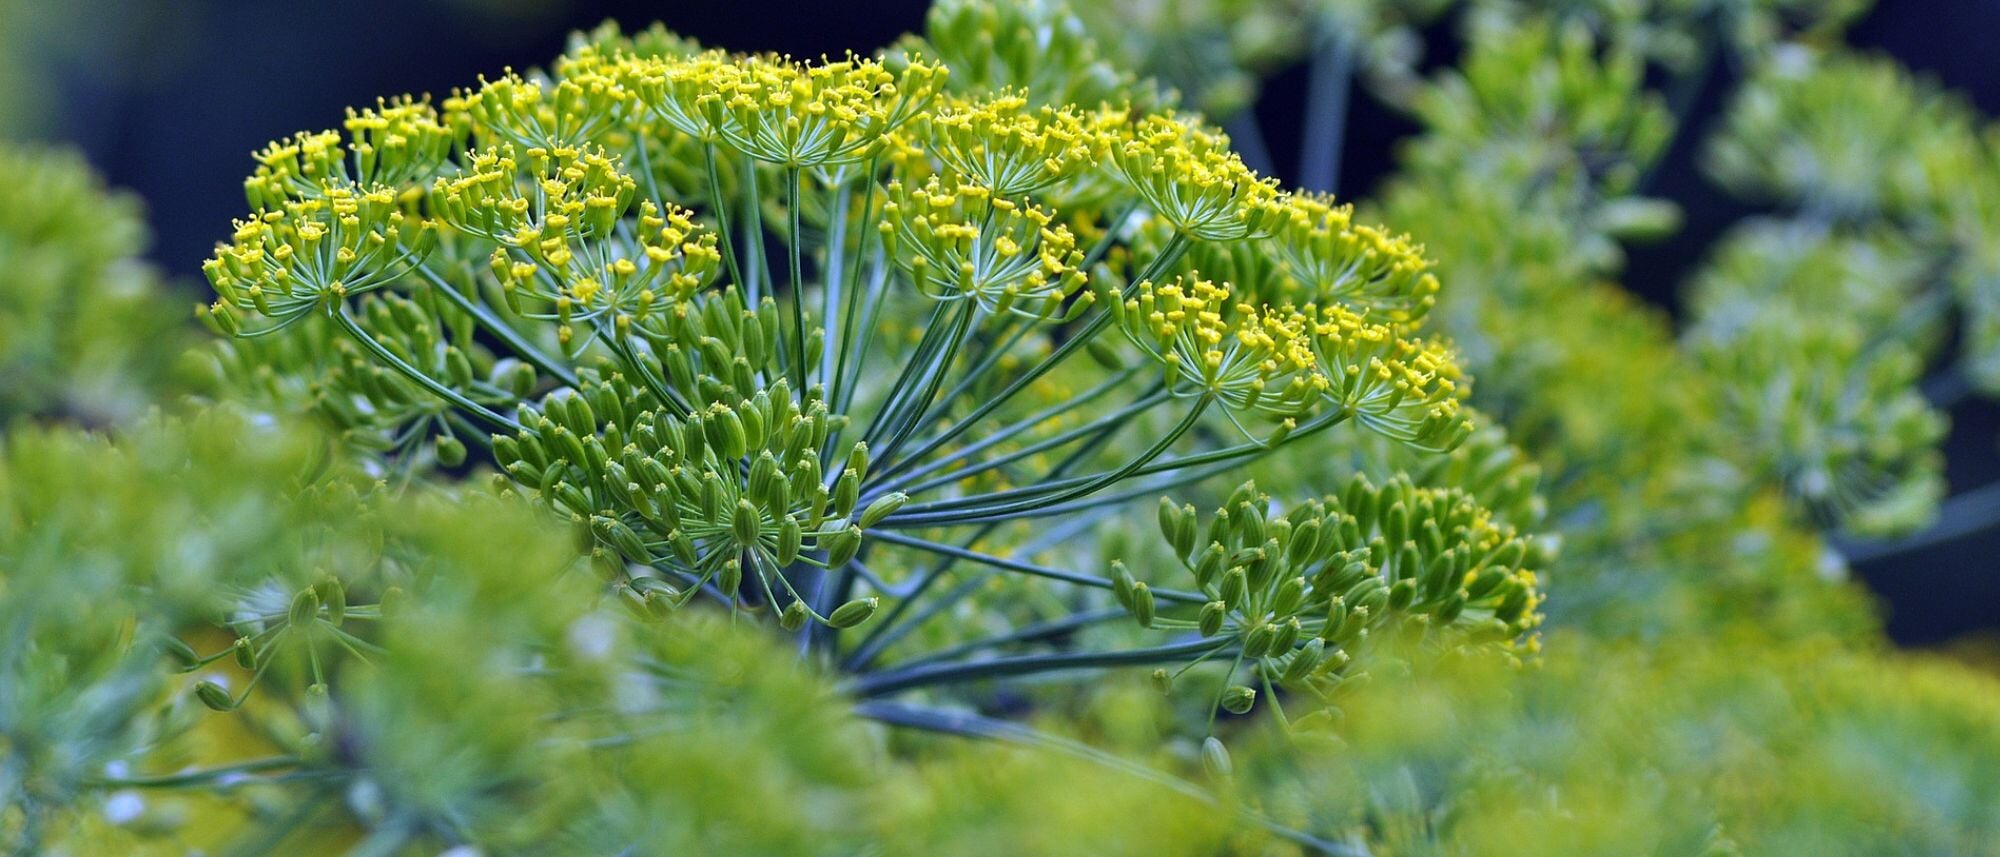 Grow delicious dill to make homemade pickles or add to other favorite dishes